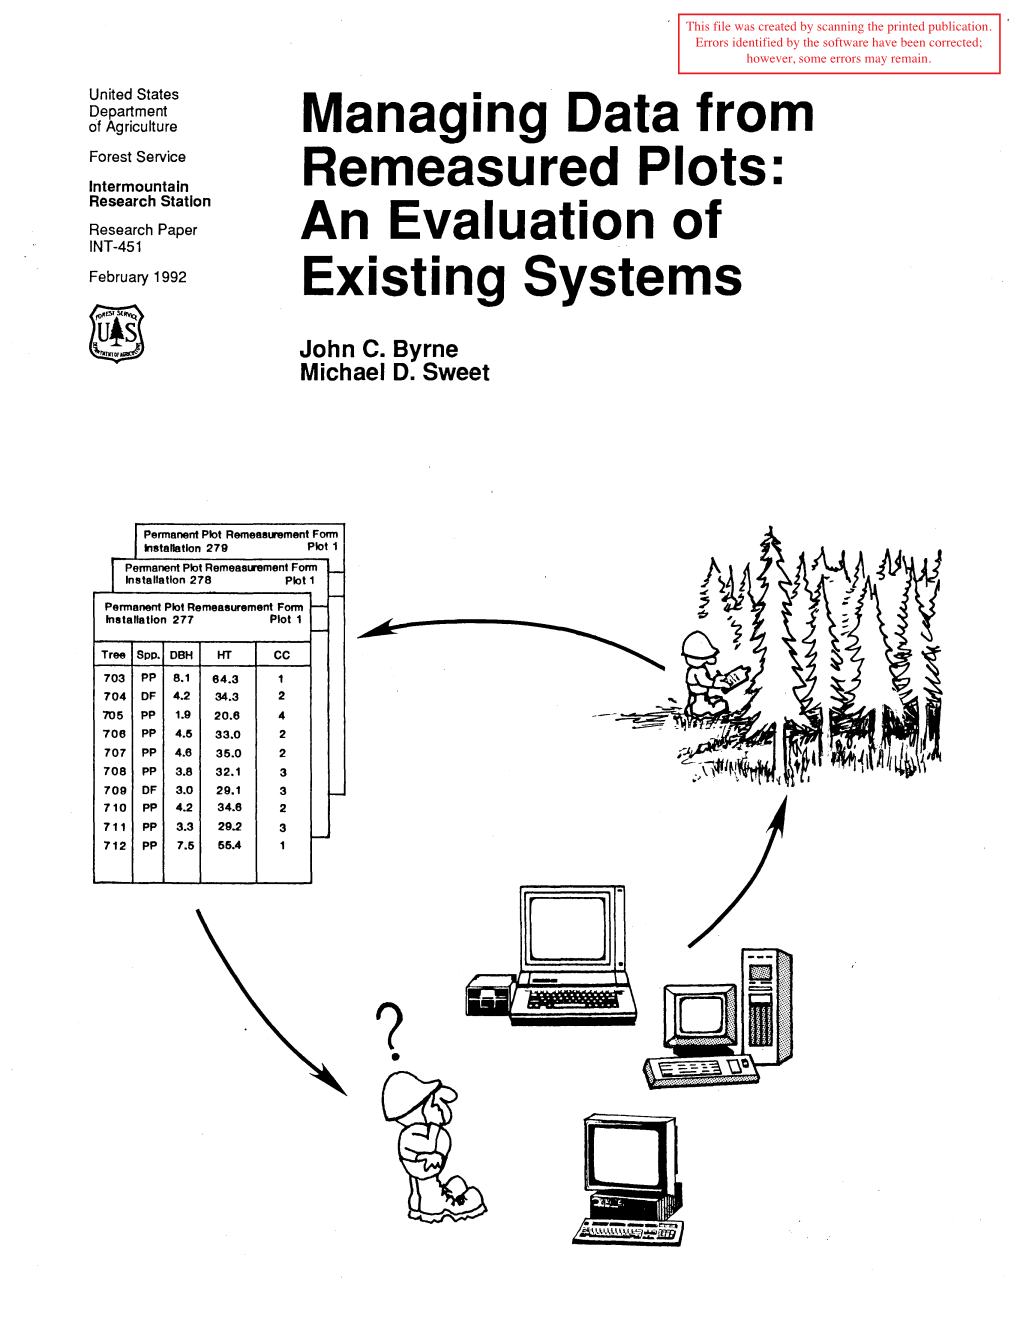 Managing Data from Remeasured Plots: an Evaluation of Existing Systems